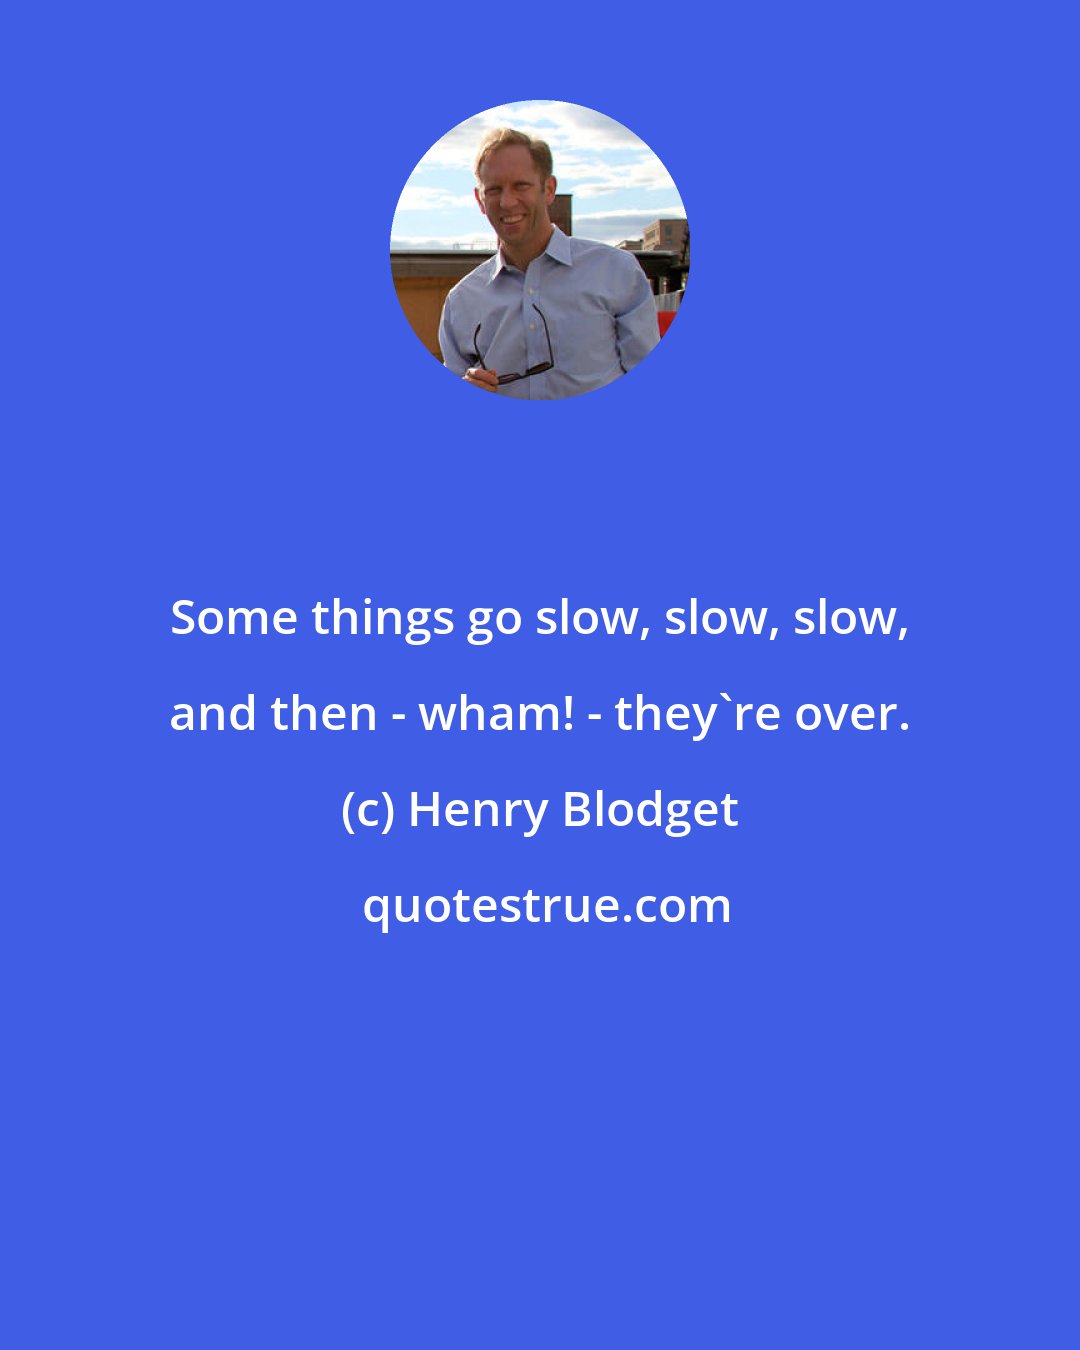 Henry Blodget: Some things go slow, slow, slow, and then - wham! - they're over.